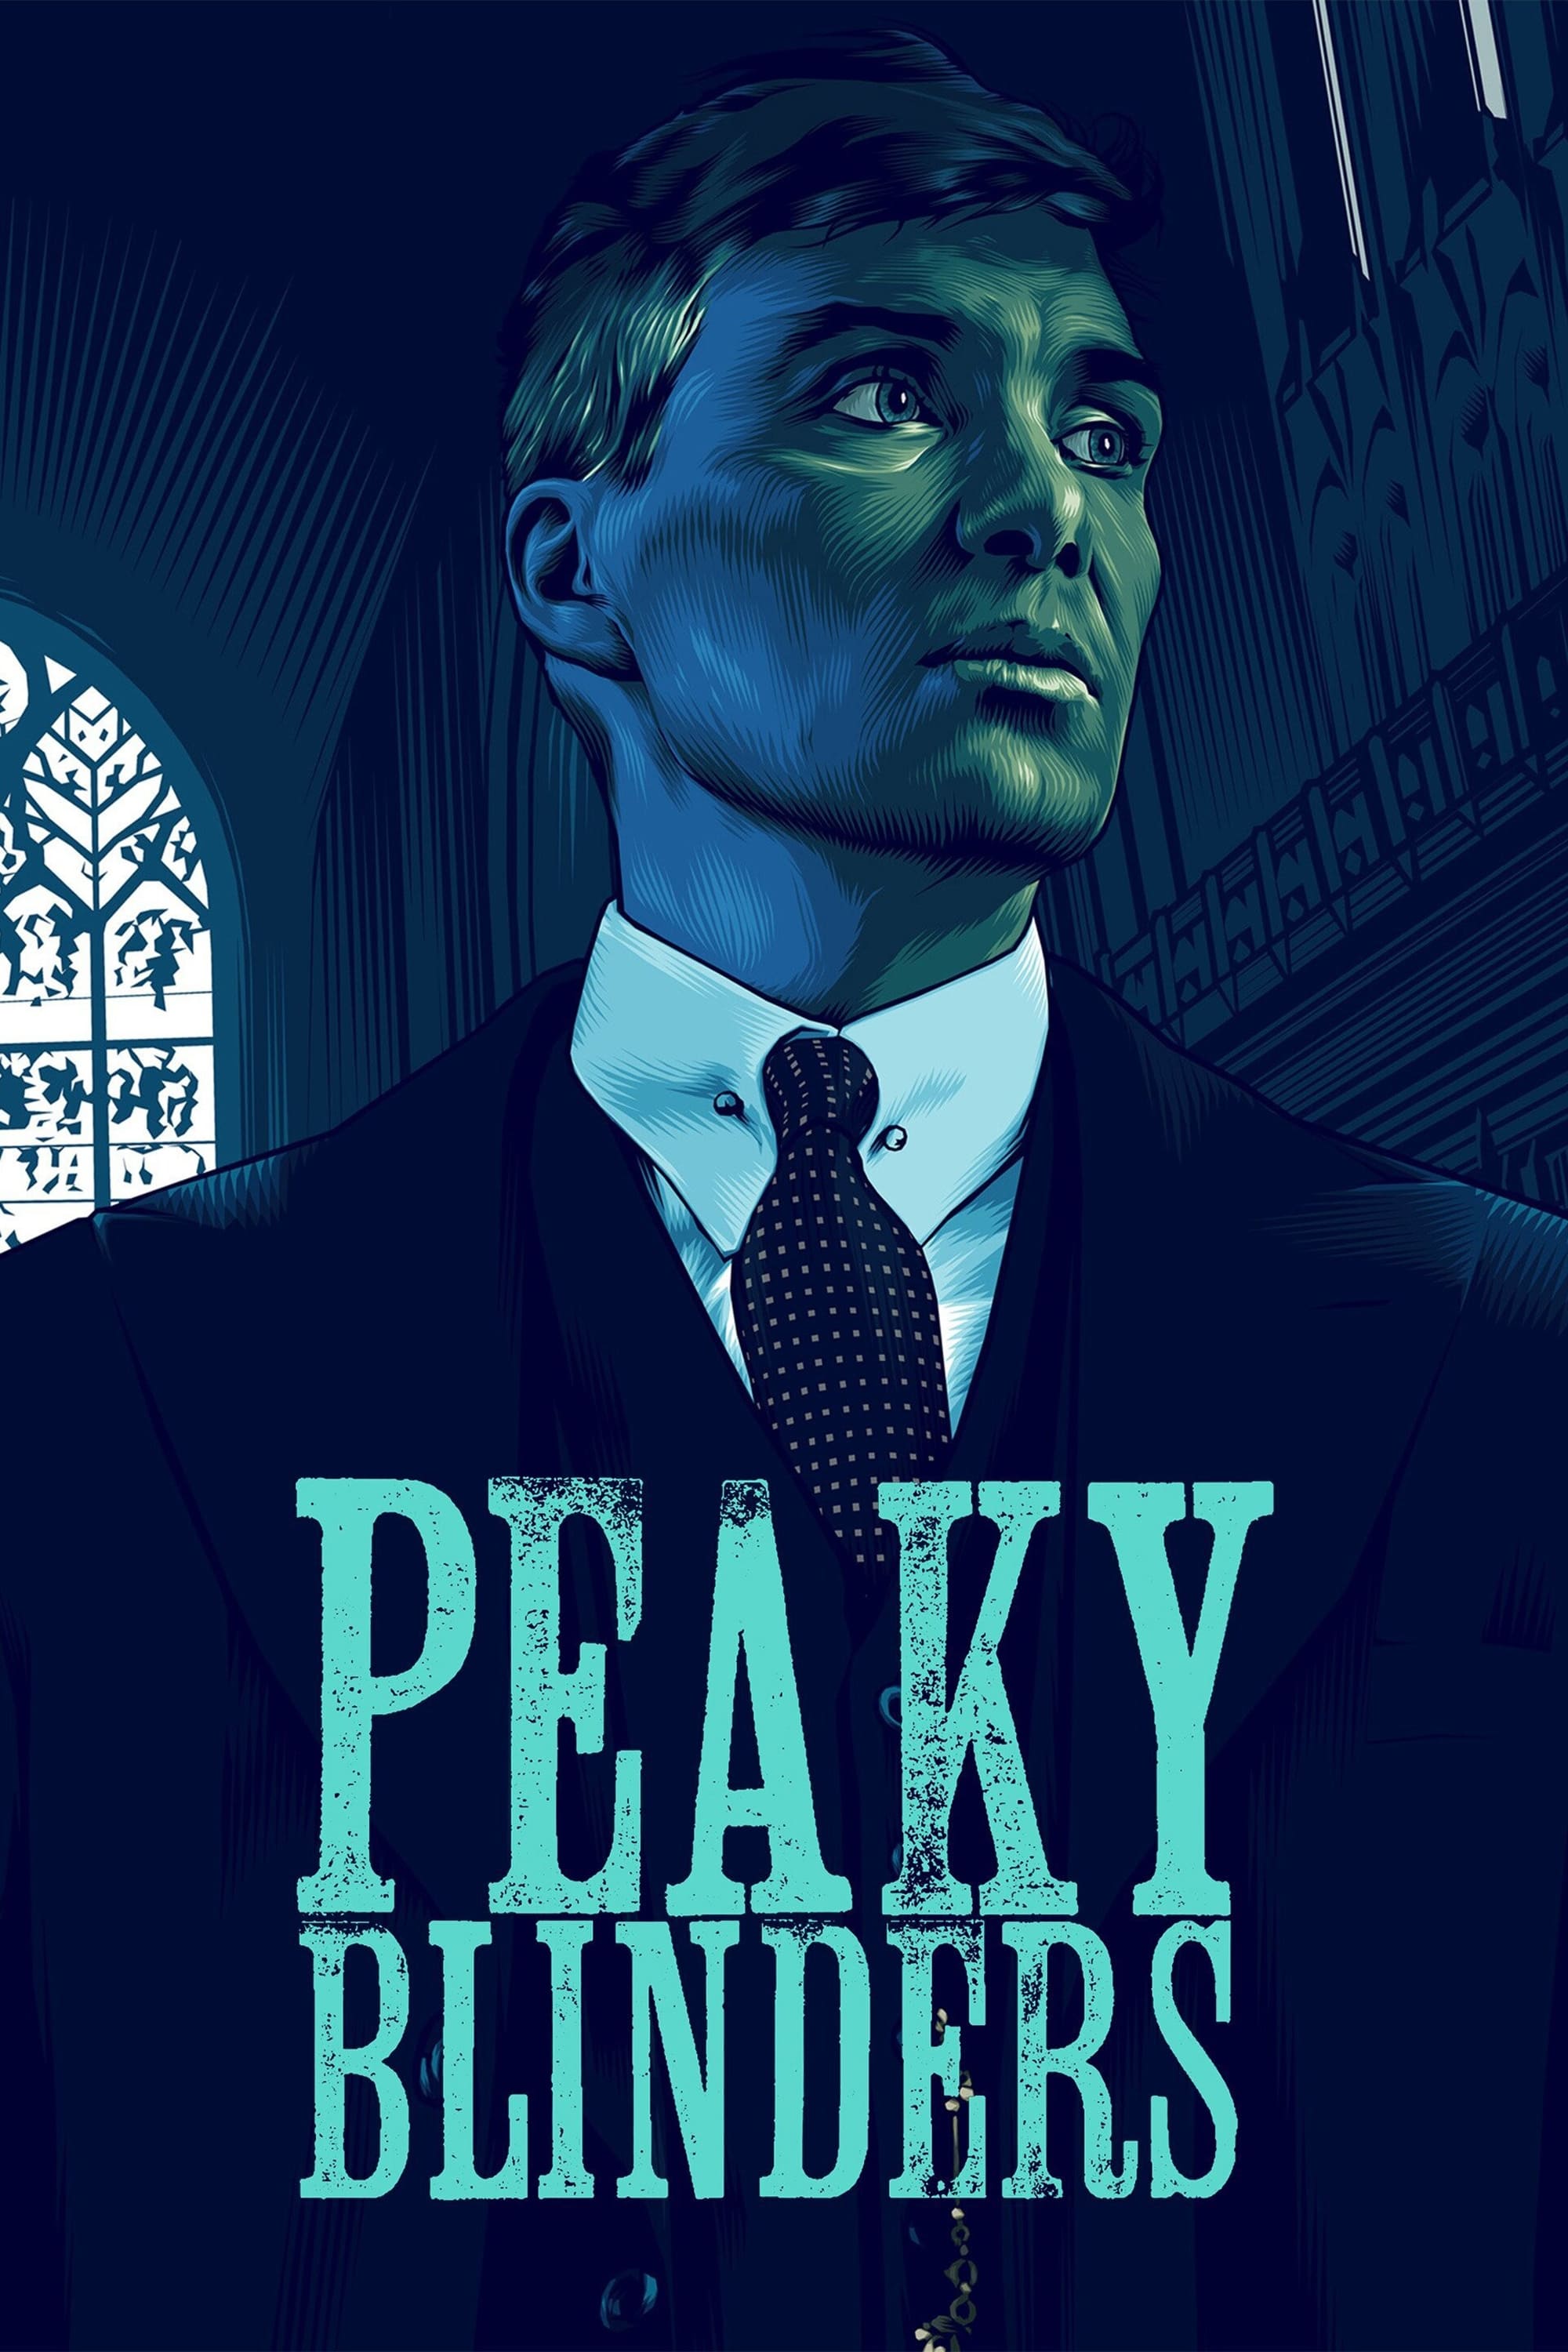 Peaky Blinders TV Shows About 1910s